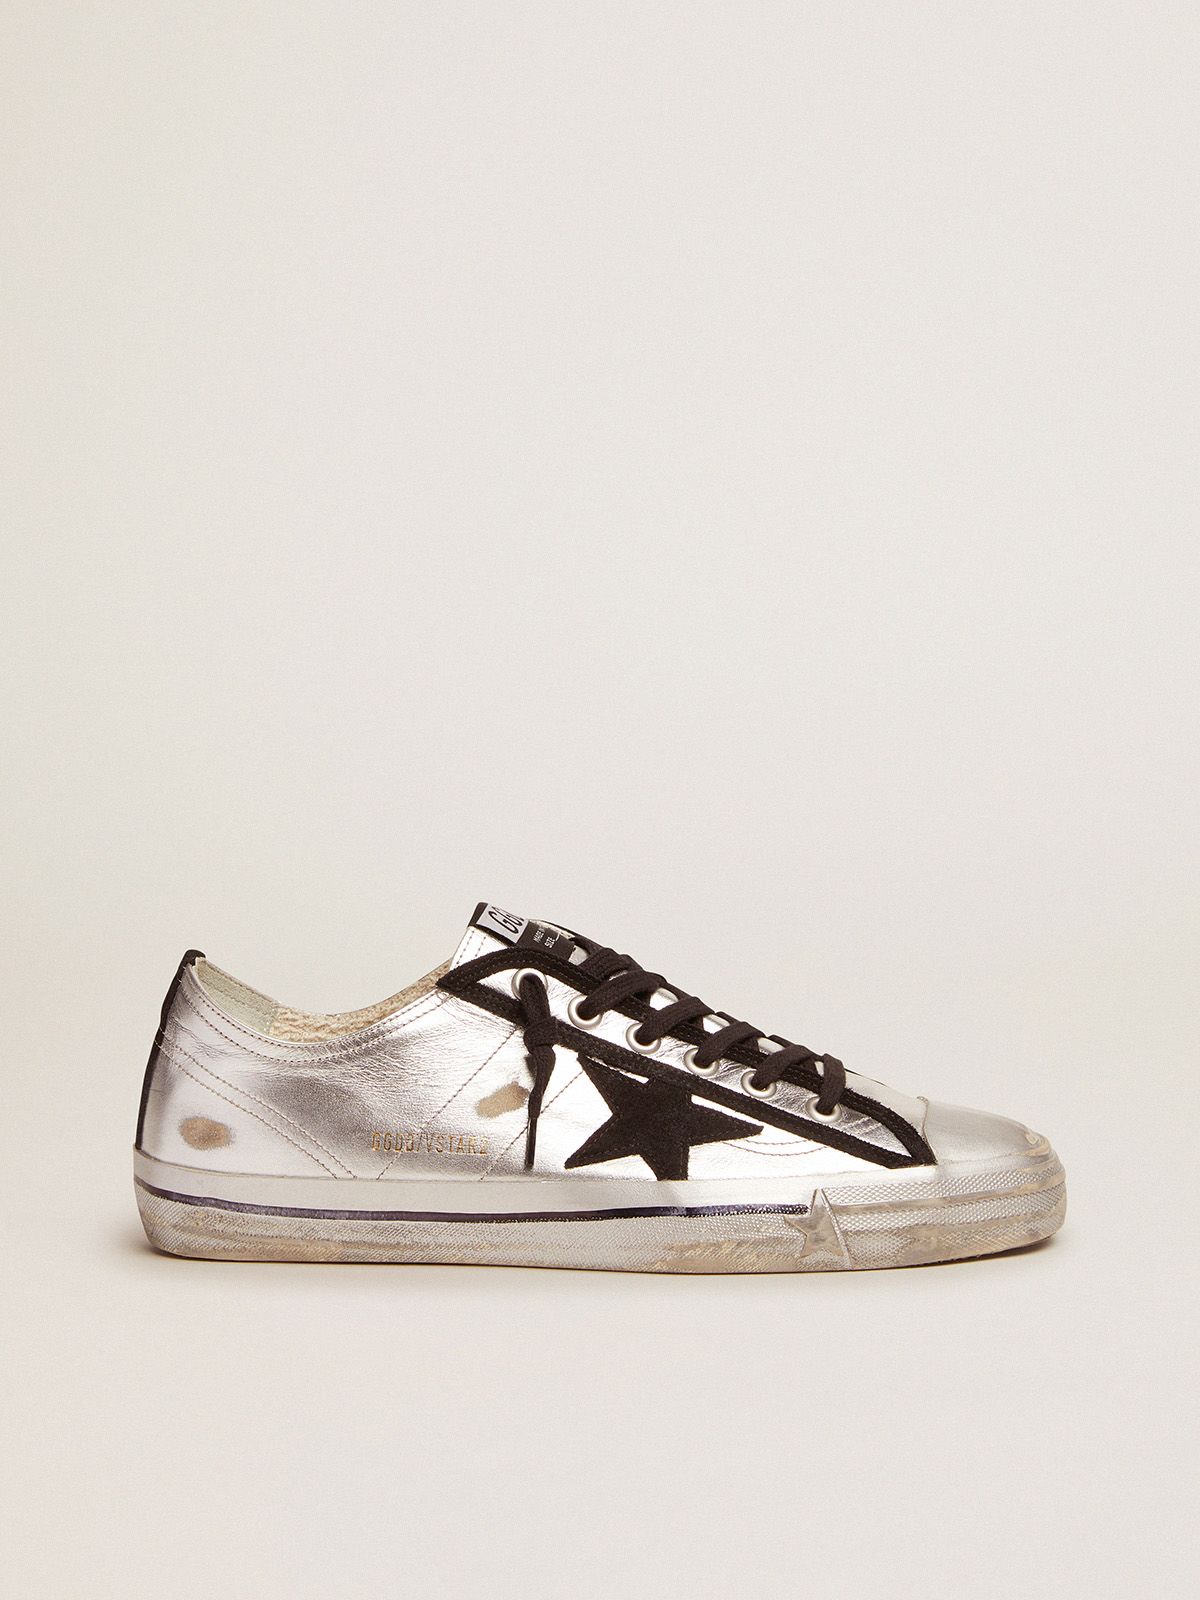 Golden Goose Saldo Uomo V-Star sneakers in silver laminated leather with black suede details